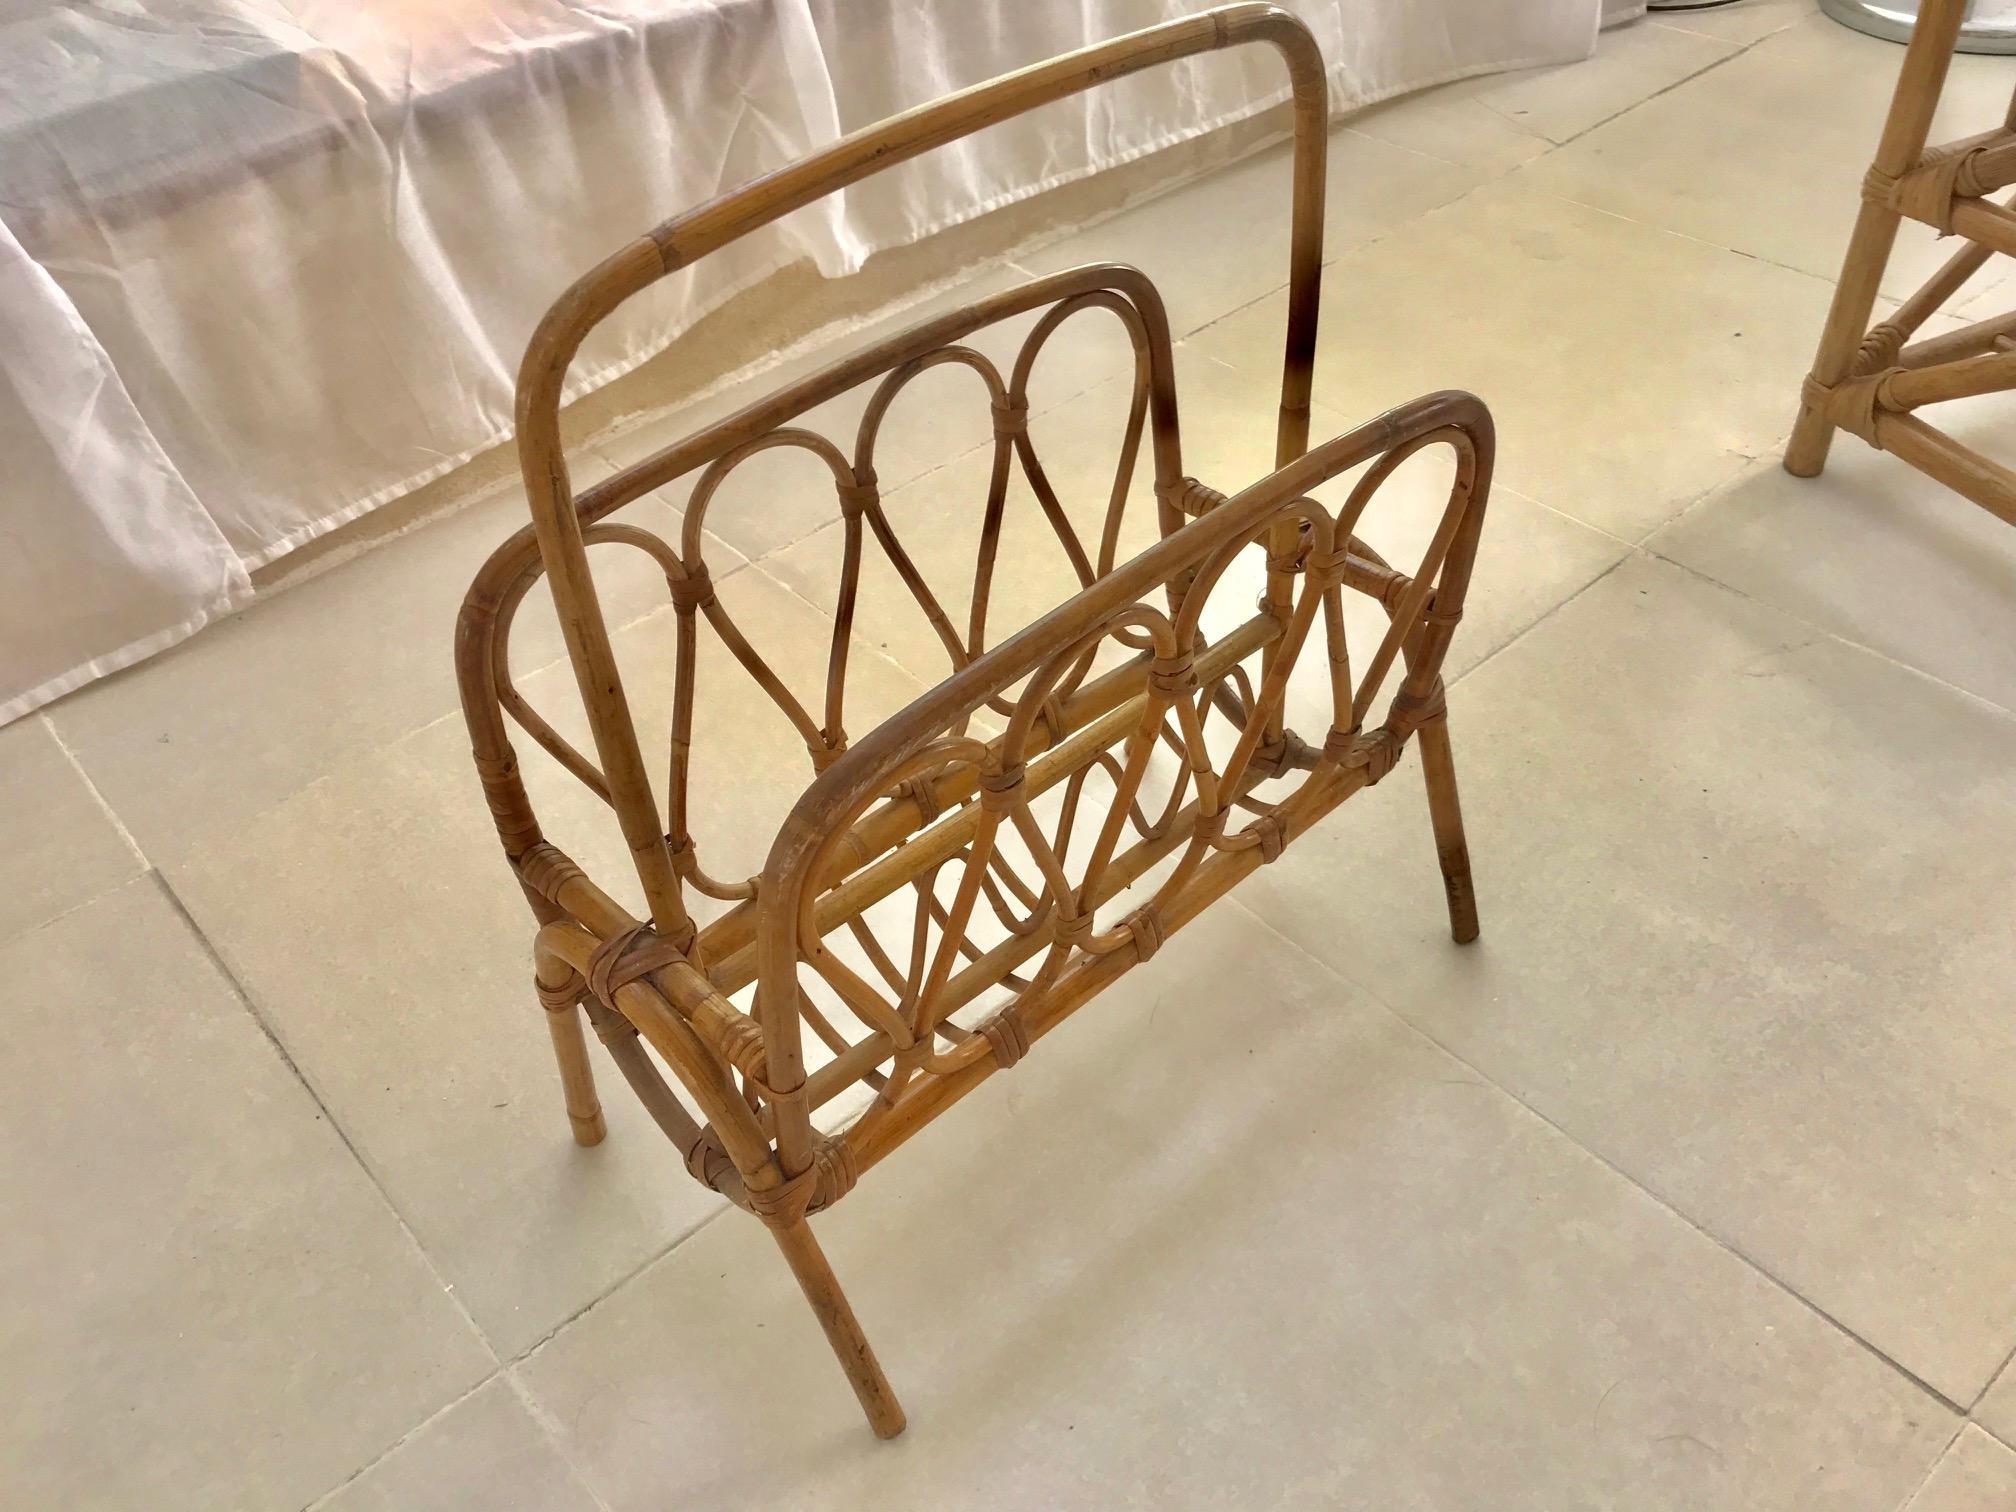 Lovely handcrafted rattan shape details.
This piece has all the taste of the Saint Tropez Riviera Mediterranean coast style and it is in excellent vintage condition.
South France, Riviera, 1950s.
Beautiful to place in interior decoration with